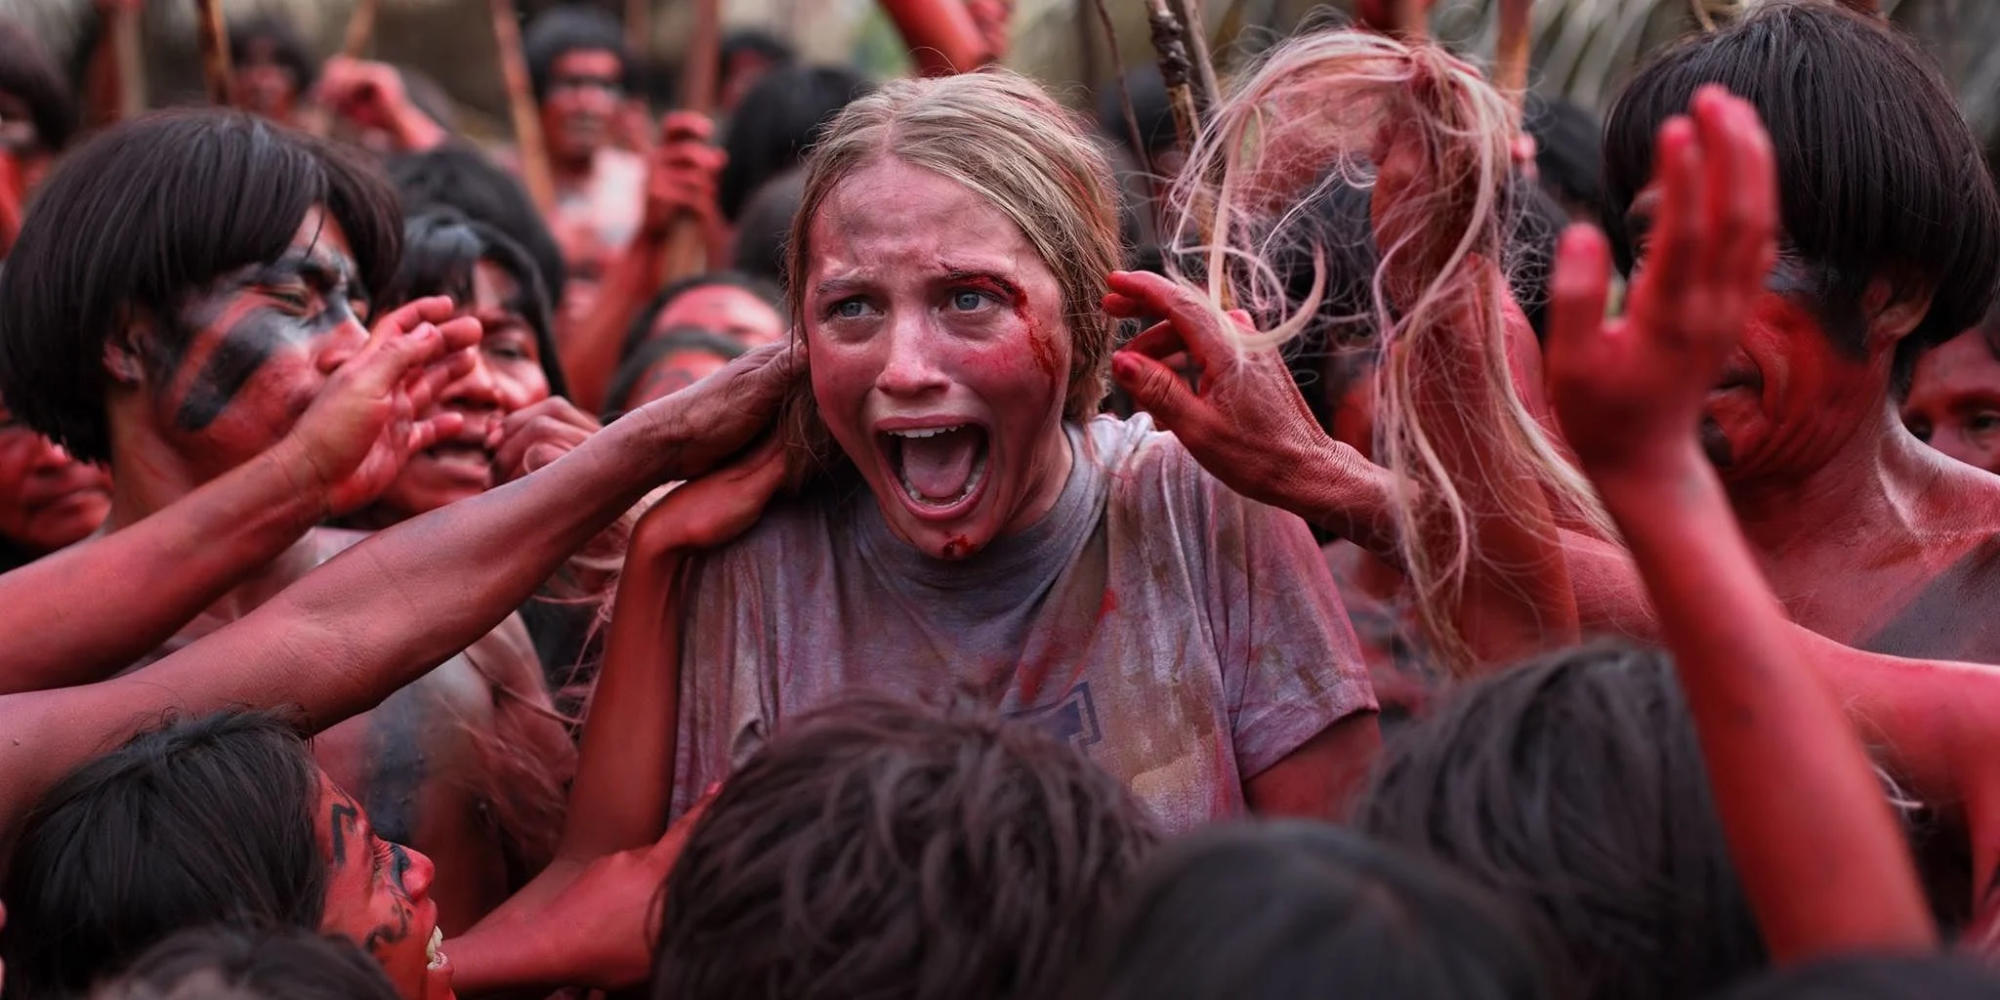 A woman screaming as she's touched by tribespeople